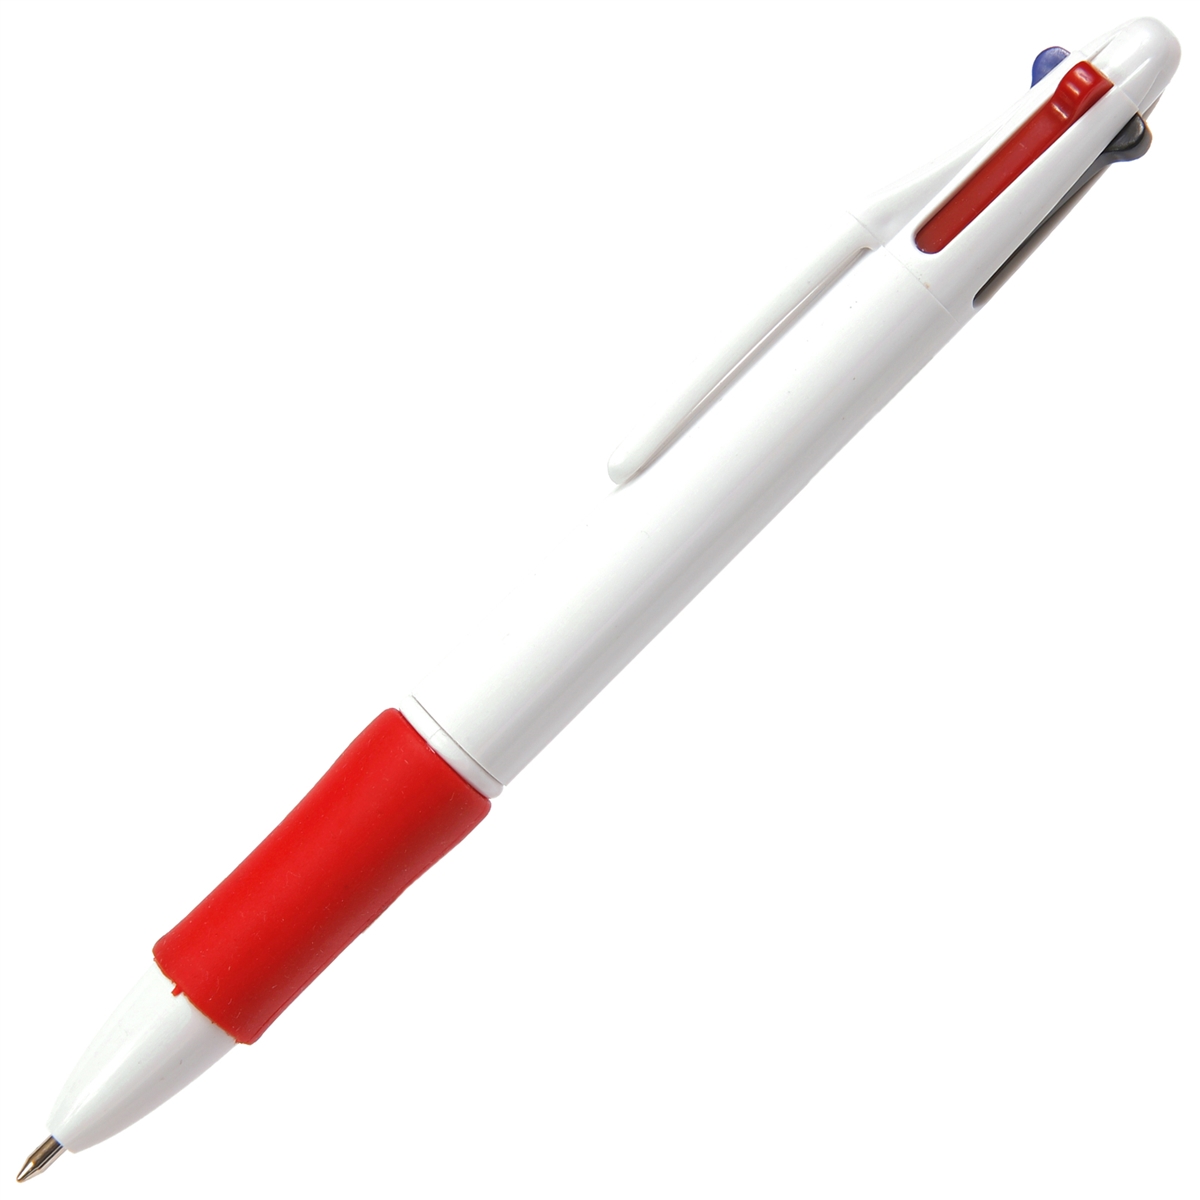 G101 - White Ball Point with Red Grip by Lanier Pens